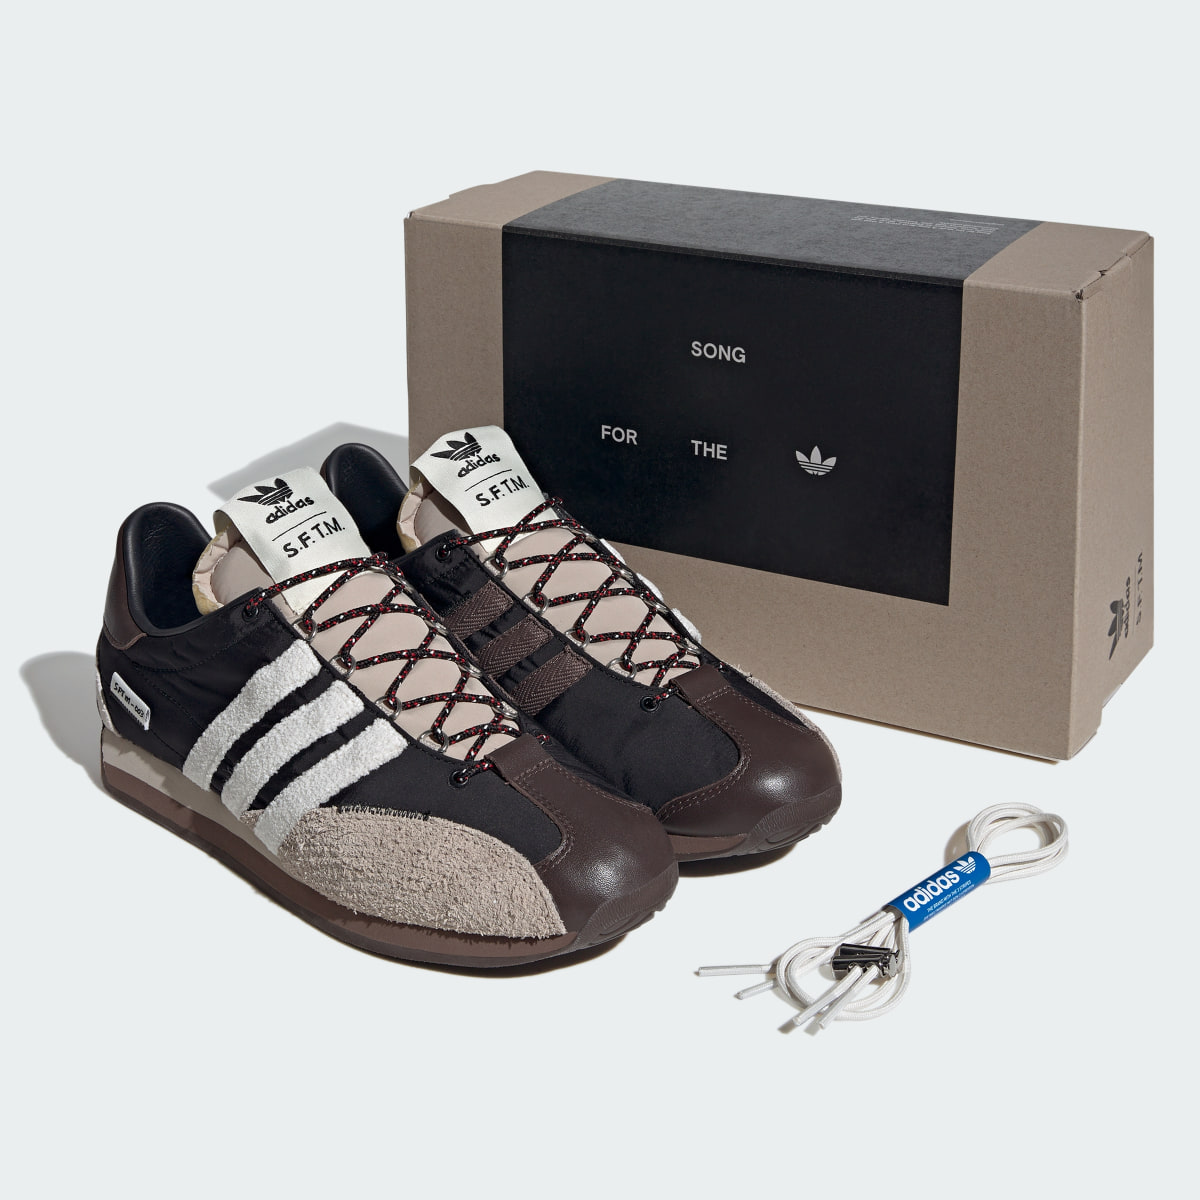 Adidas SFTM Country OG Low Trainers. 10